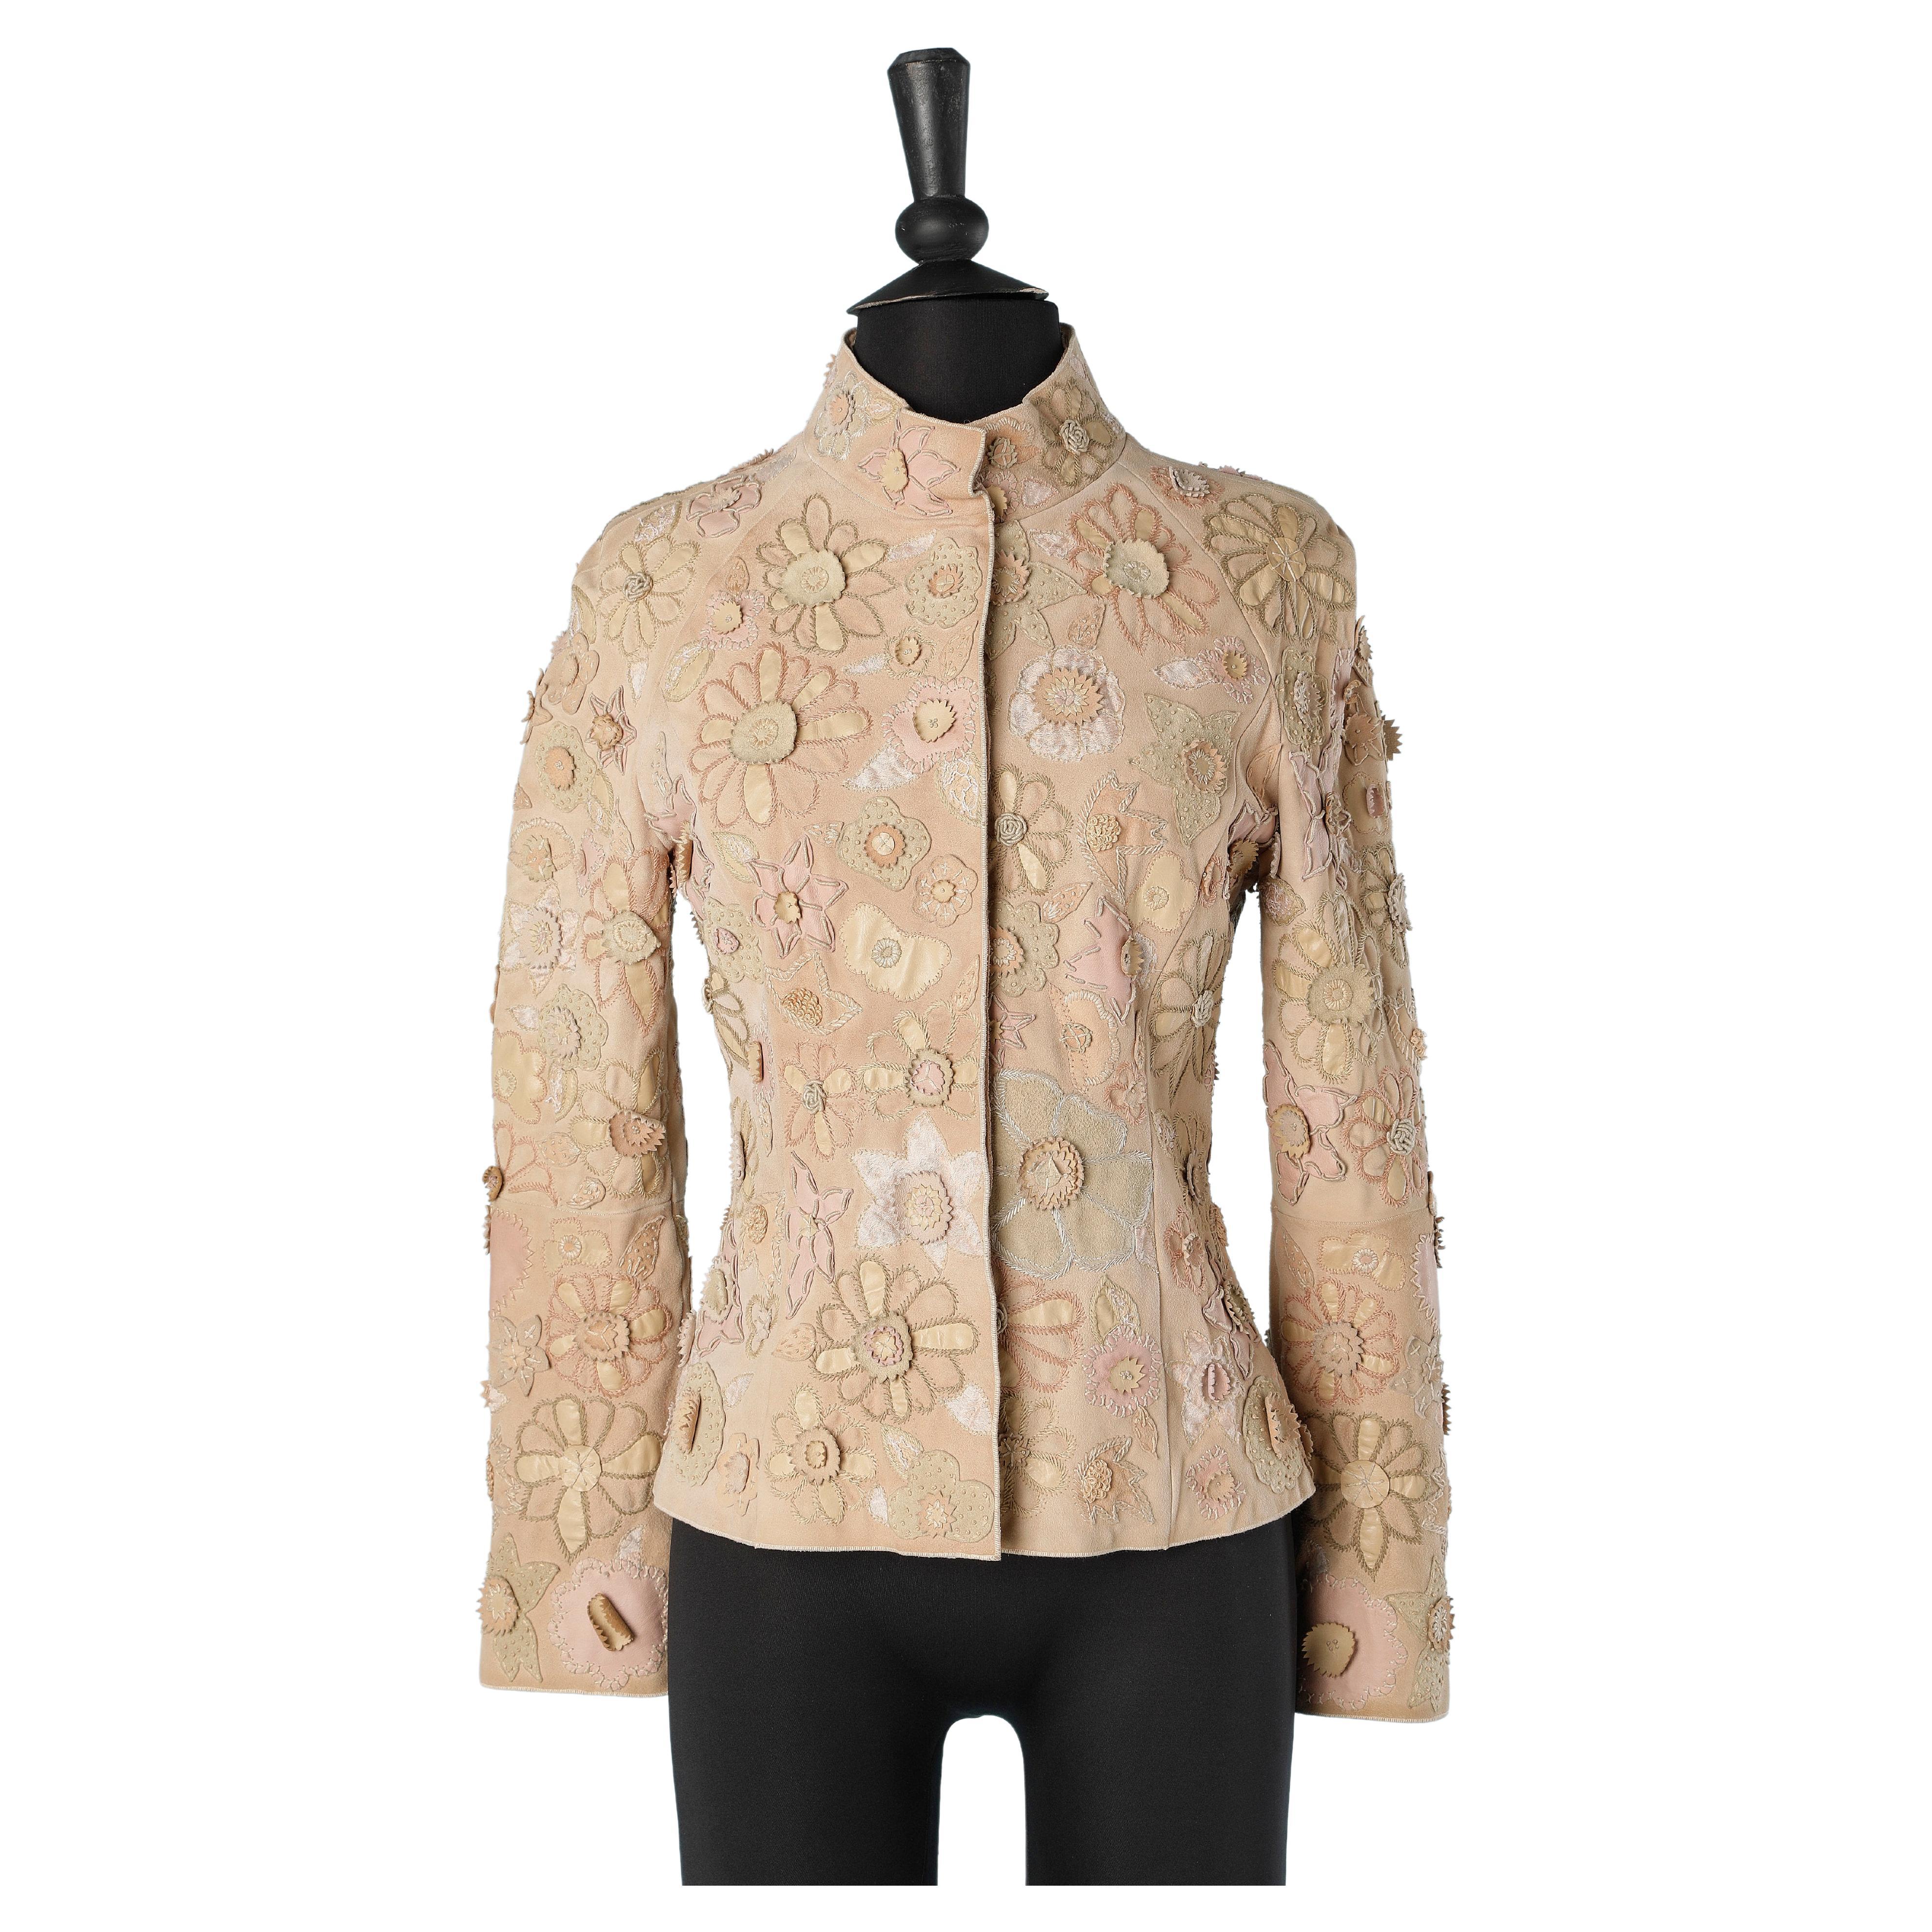 Pinkish beige suede jacket with suede and leather flowers appliqué J Mendel